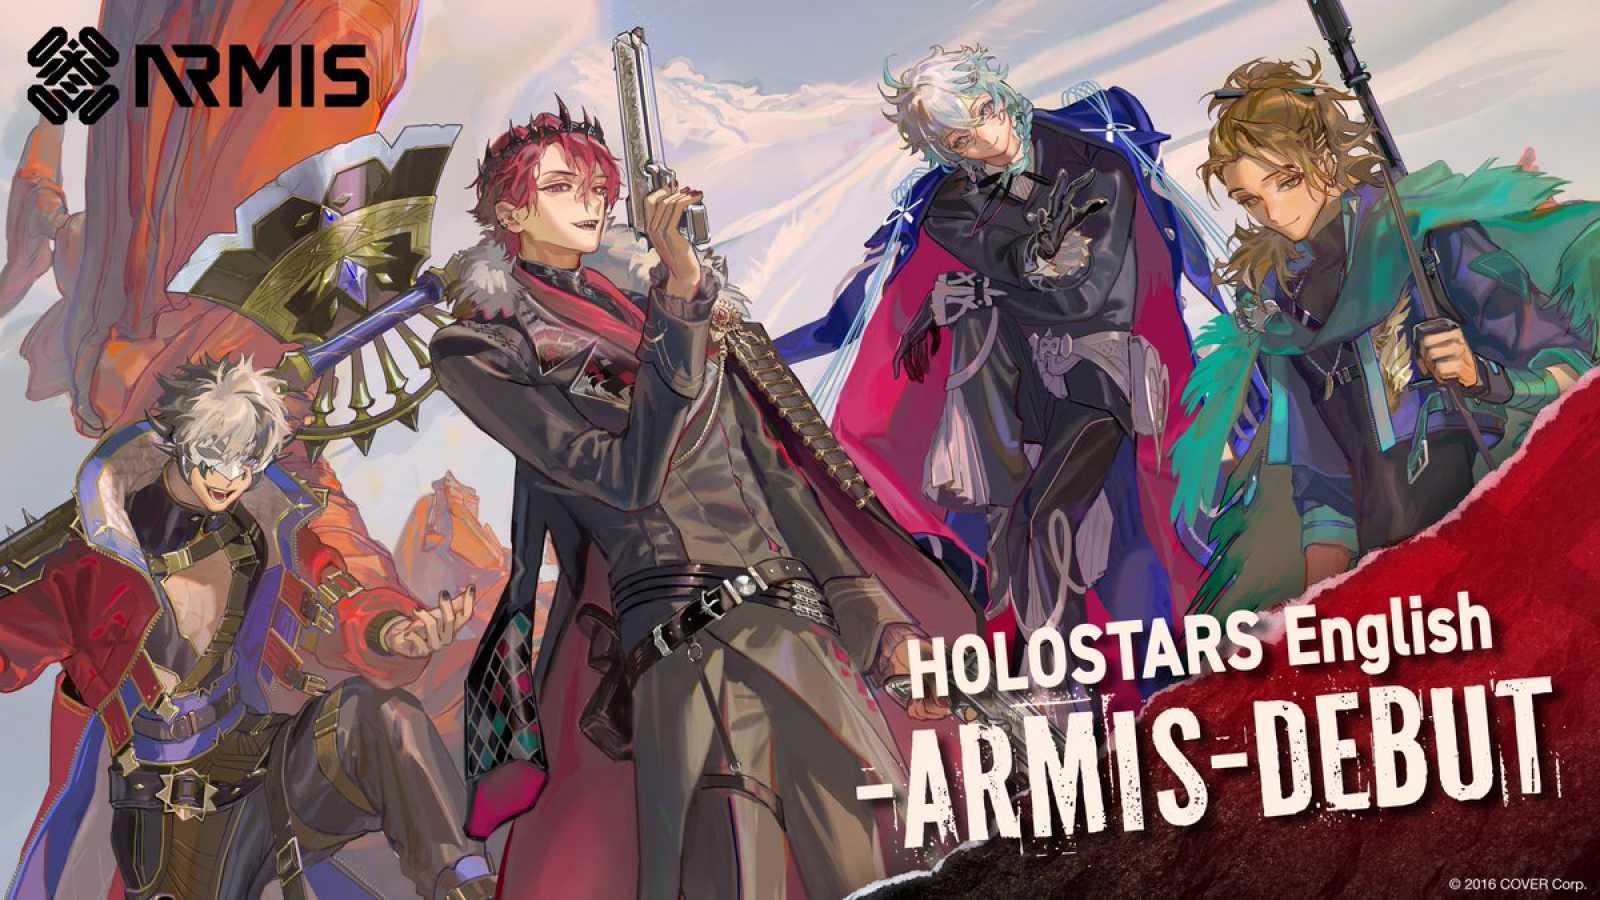 HOLOSTARS English to Debut New Unit ARMIS © COVER Corp. All rights reserved.